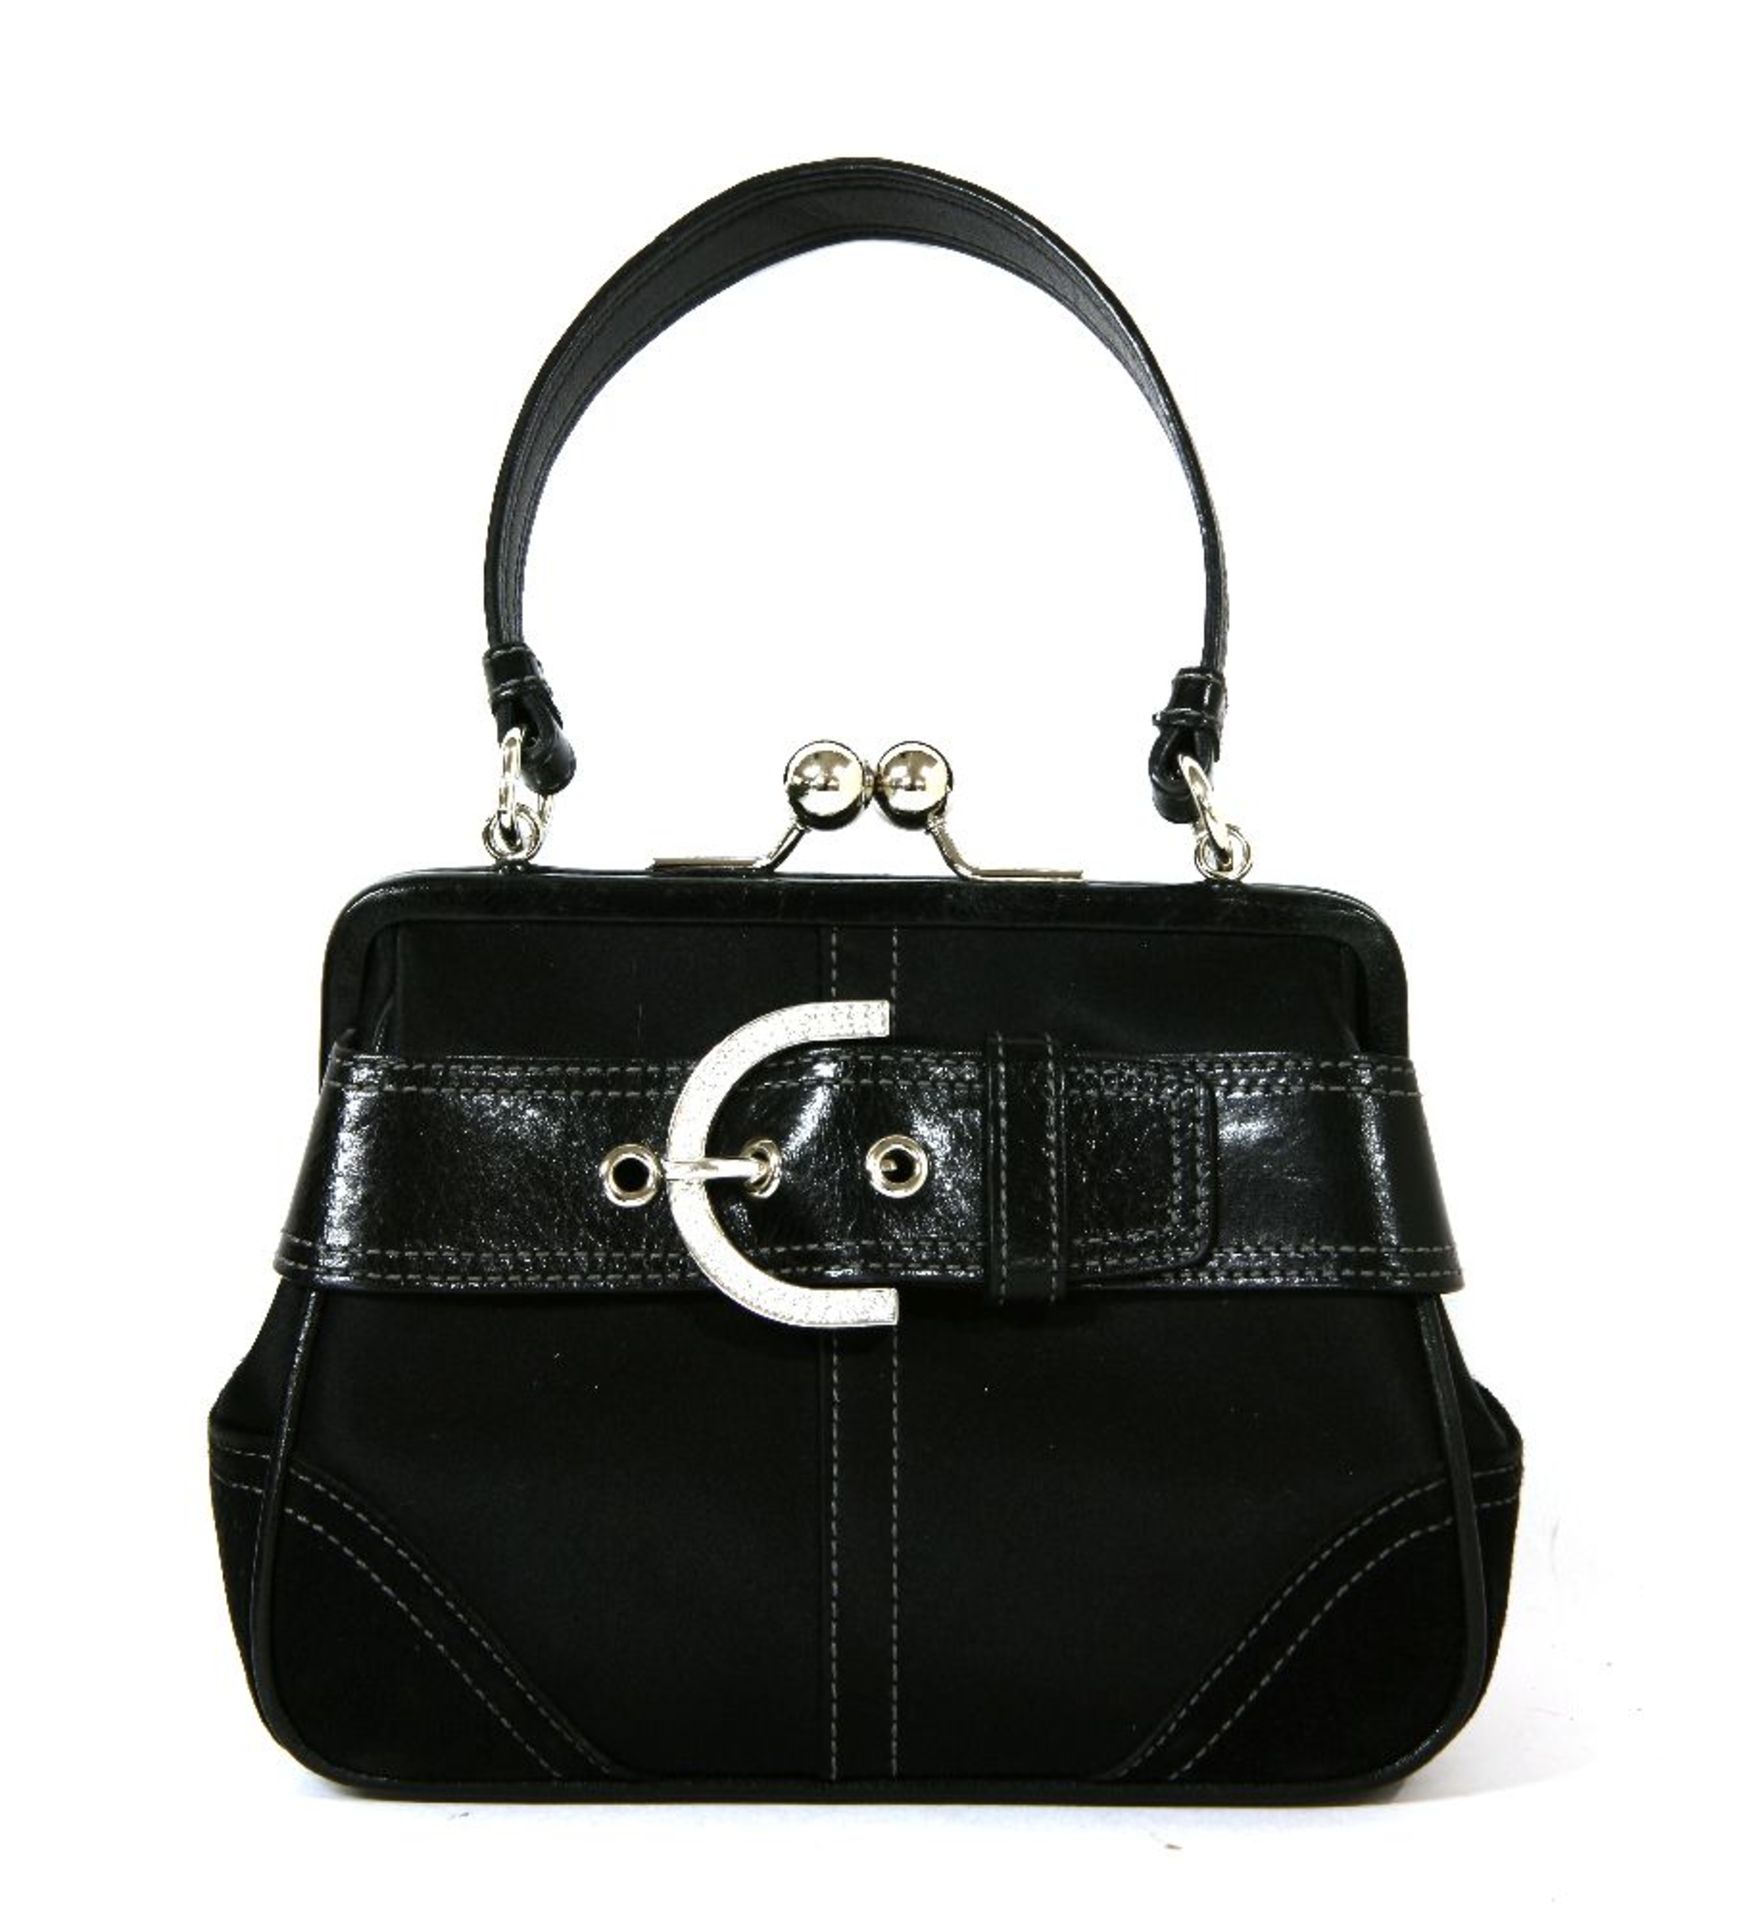 A Coach black satin evening handbag,with contrasting stitching and a belt buckle design around the